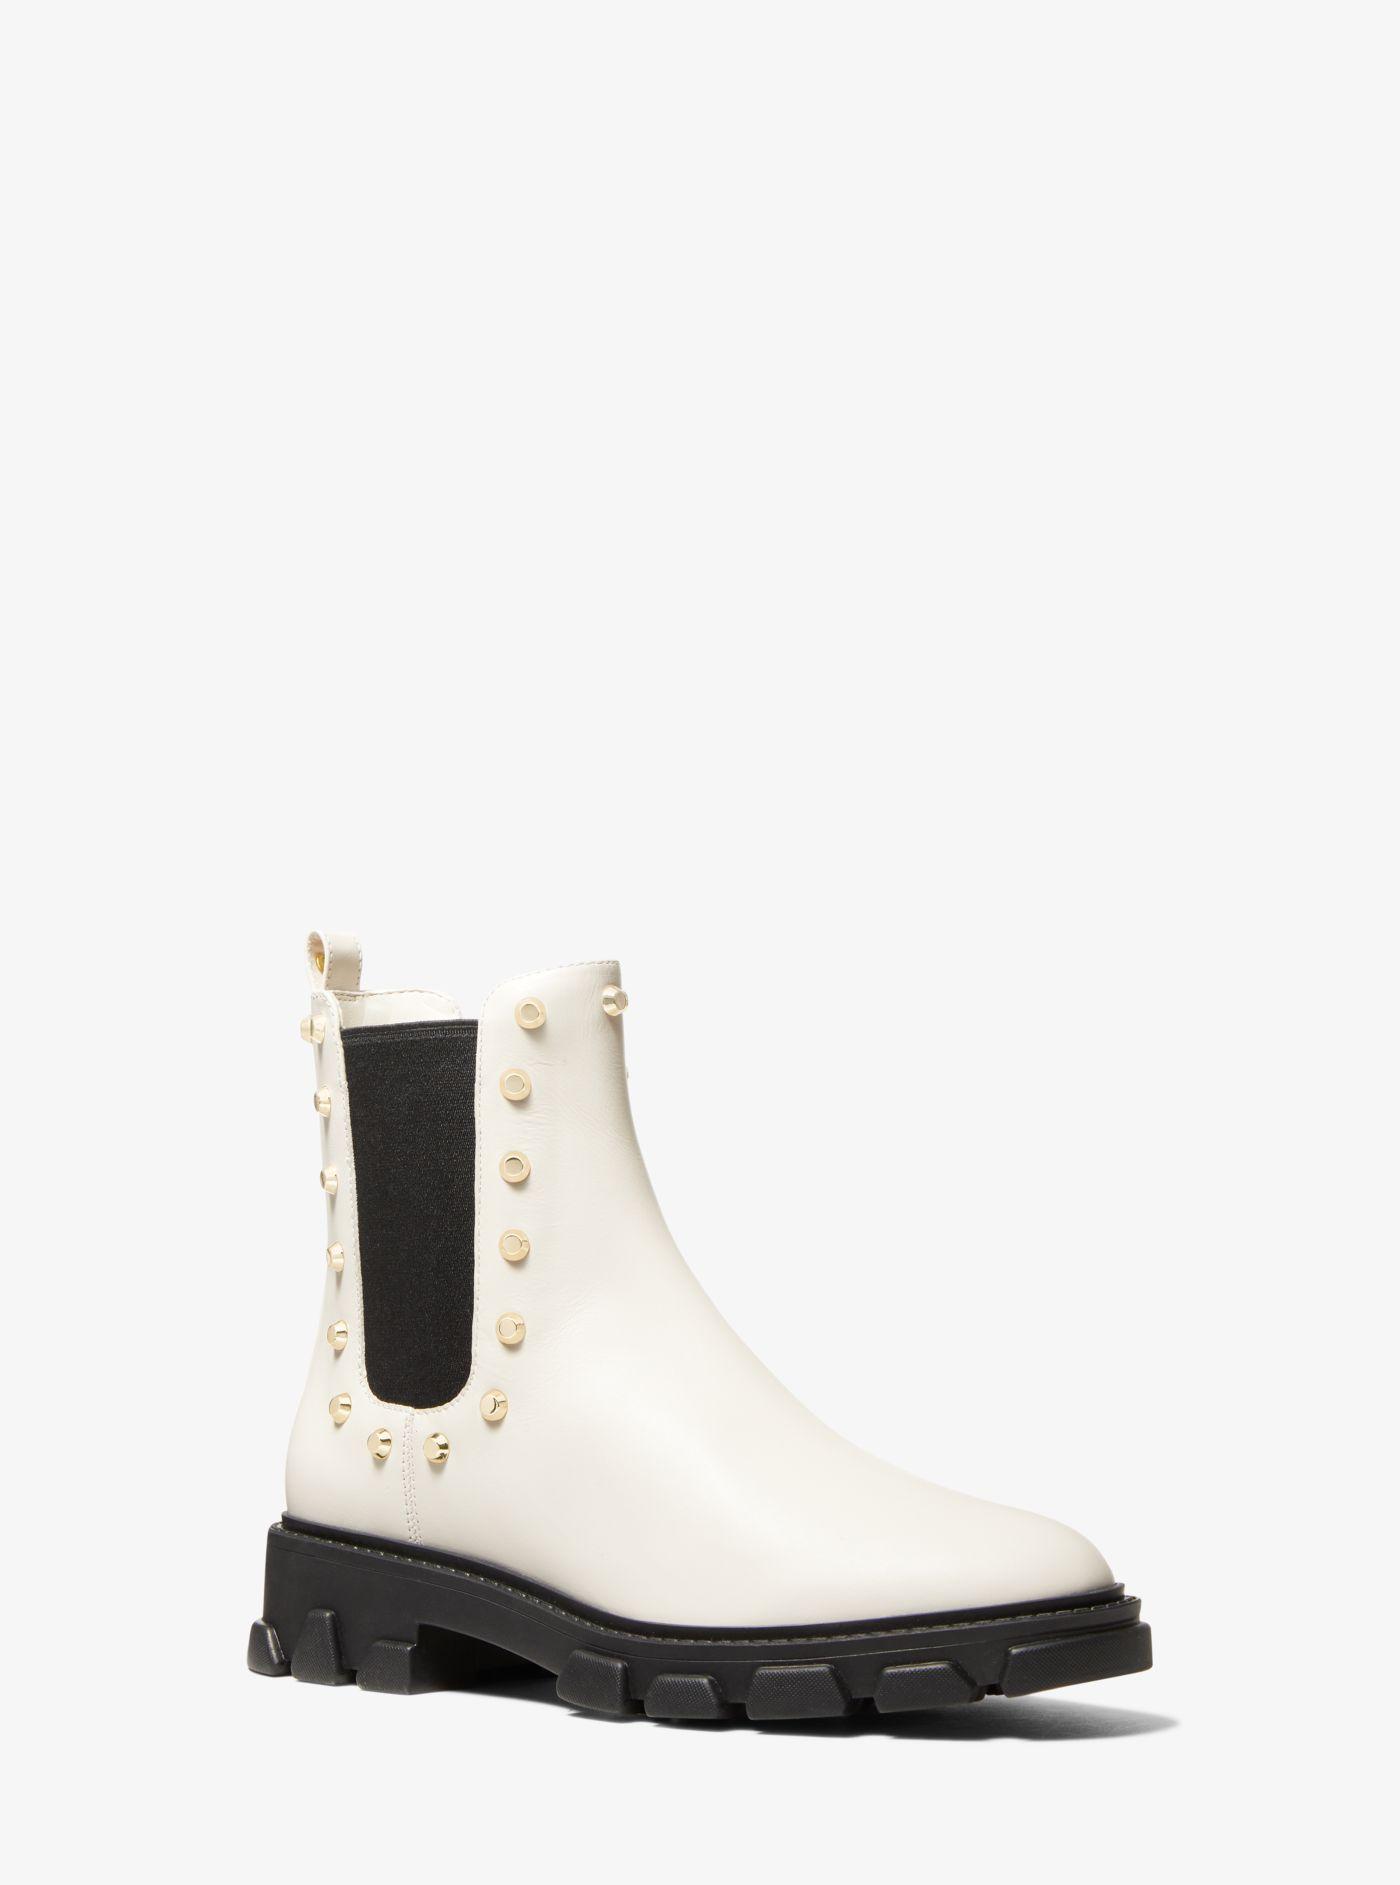 Michael Kors Ridley Astor Stud Leather Boot in White | Lyst